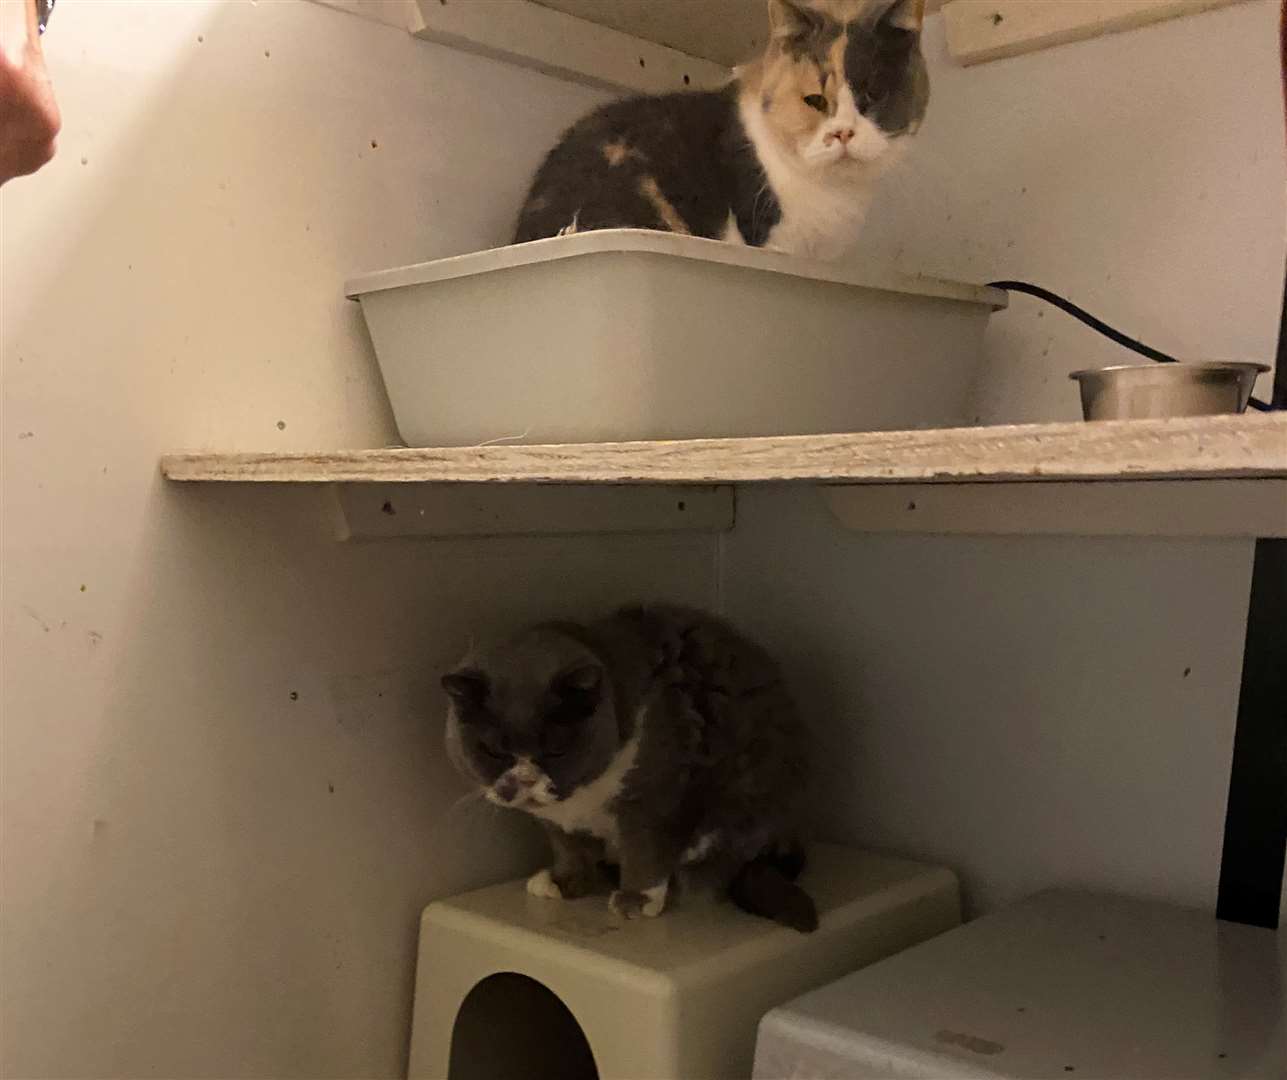 Images of Barnside cattery submitted in evidence by Gravesham Borough Council